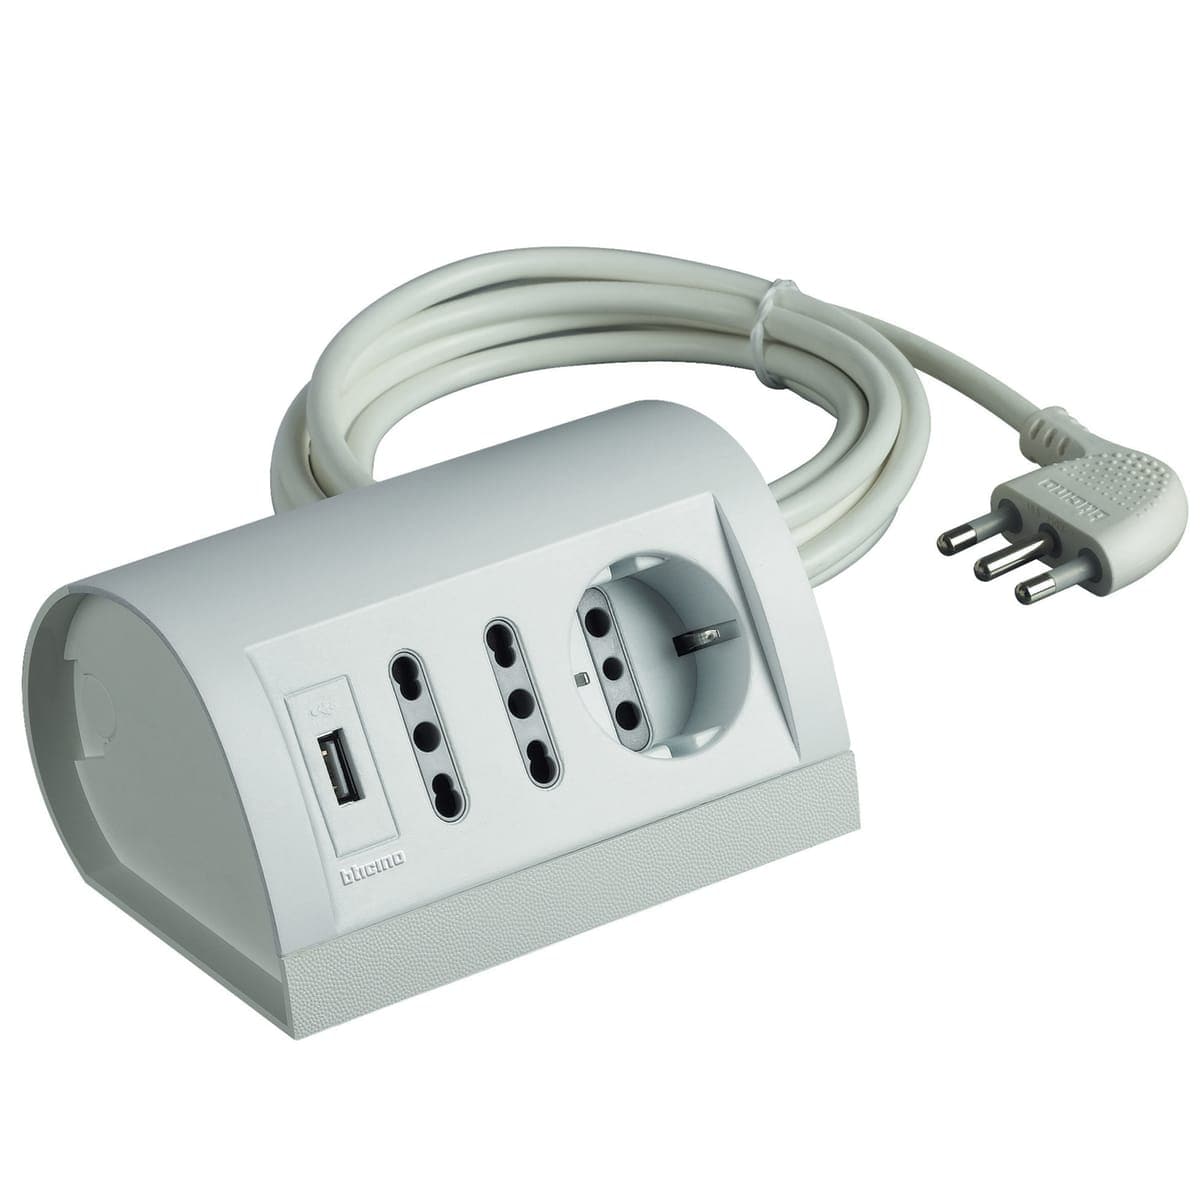 DESK MULTISOCKET 16A PLUG 3 SOCKETS AND 2 USB CABLE 2MT WHITE